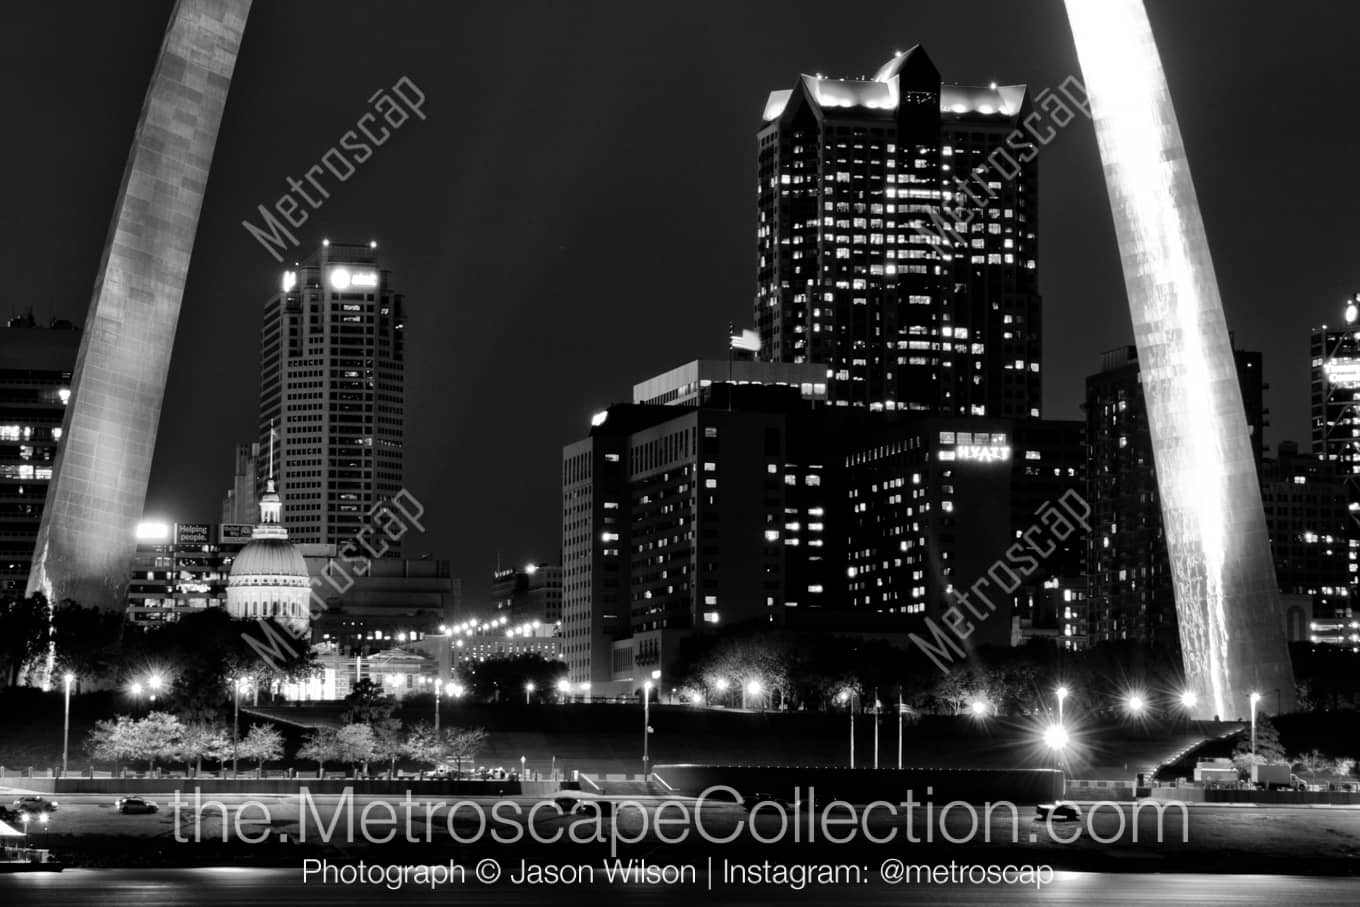 St Louis Missouri Picture at Night